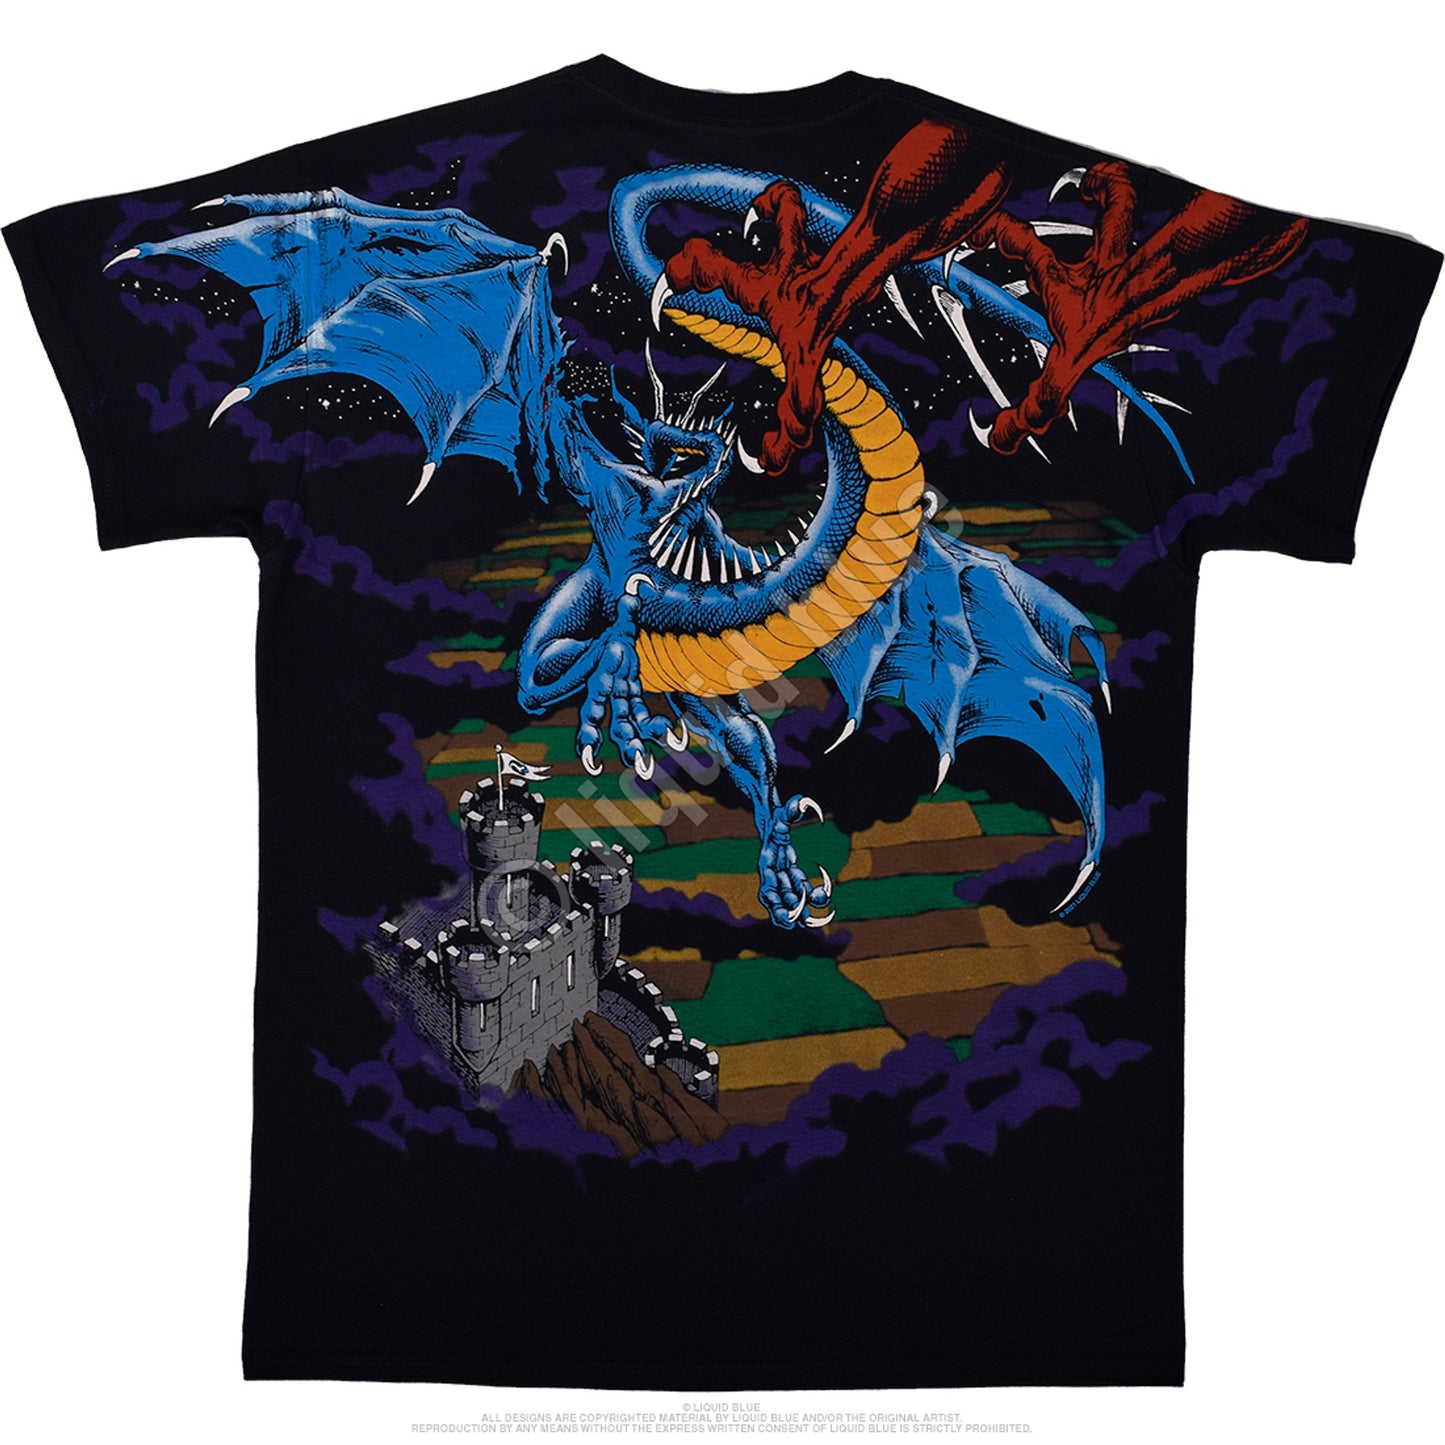 Dueling Dragons by Liquid Blue, T-Shirt